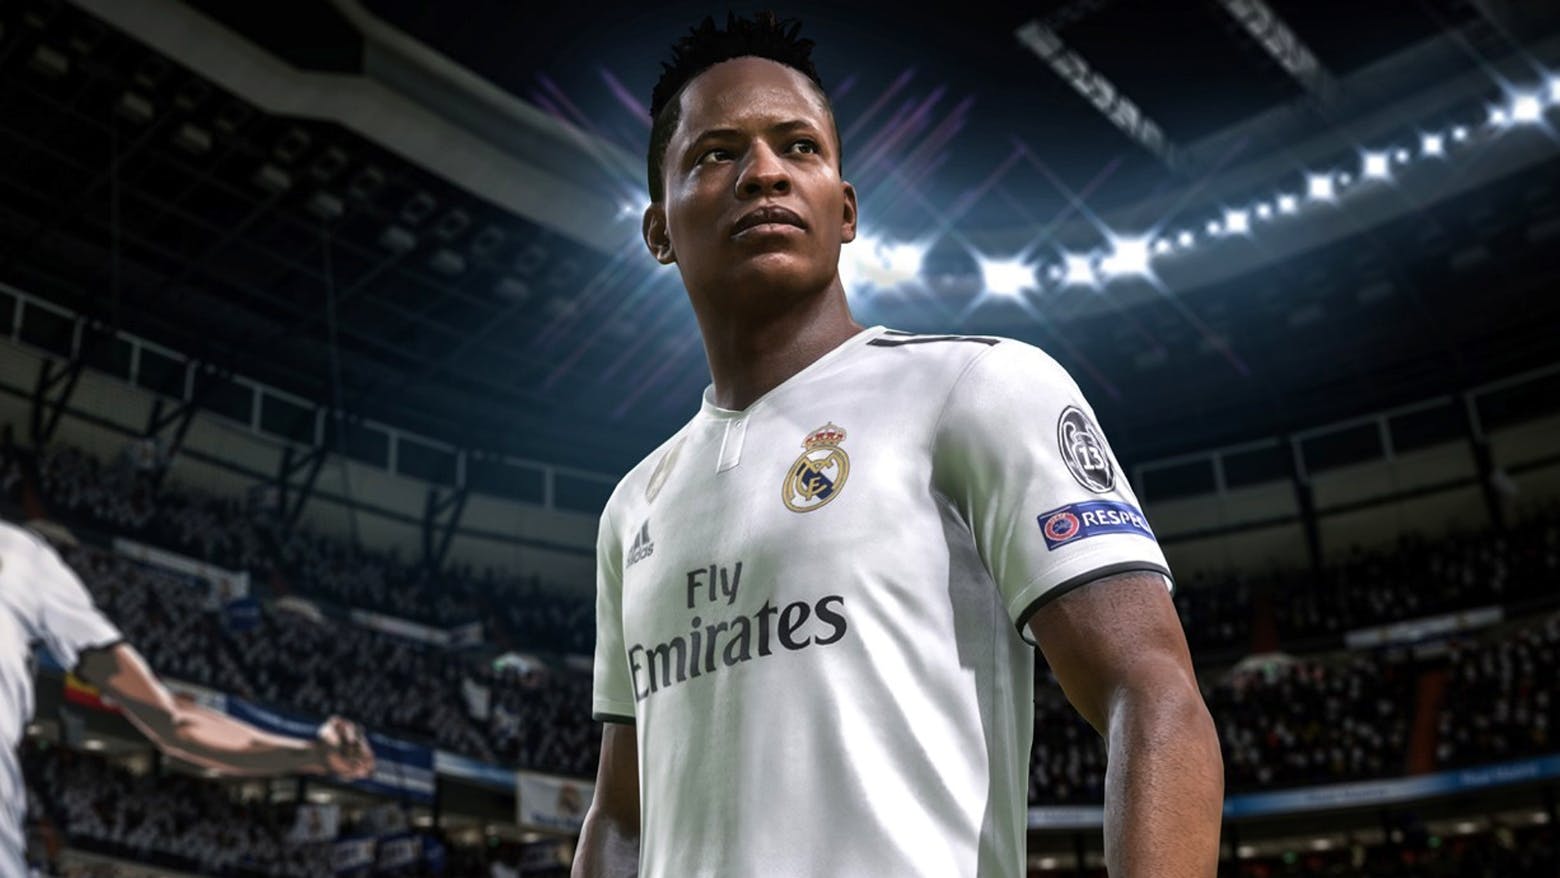 A playable character in FIFA 19